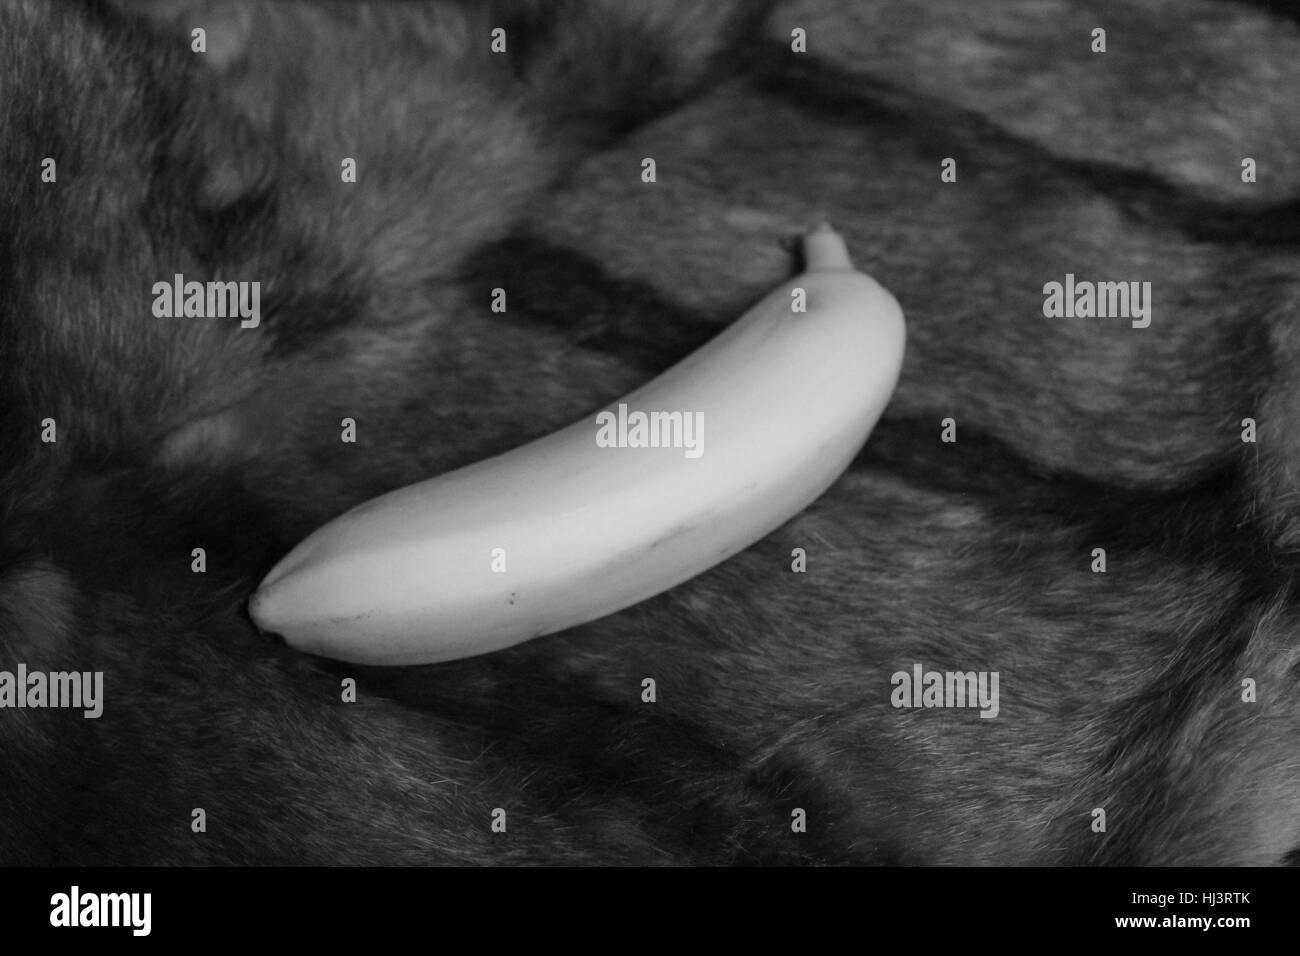 appetizing sweet banana lay on dark fur nice  healthy snack and object for art Stock Photo